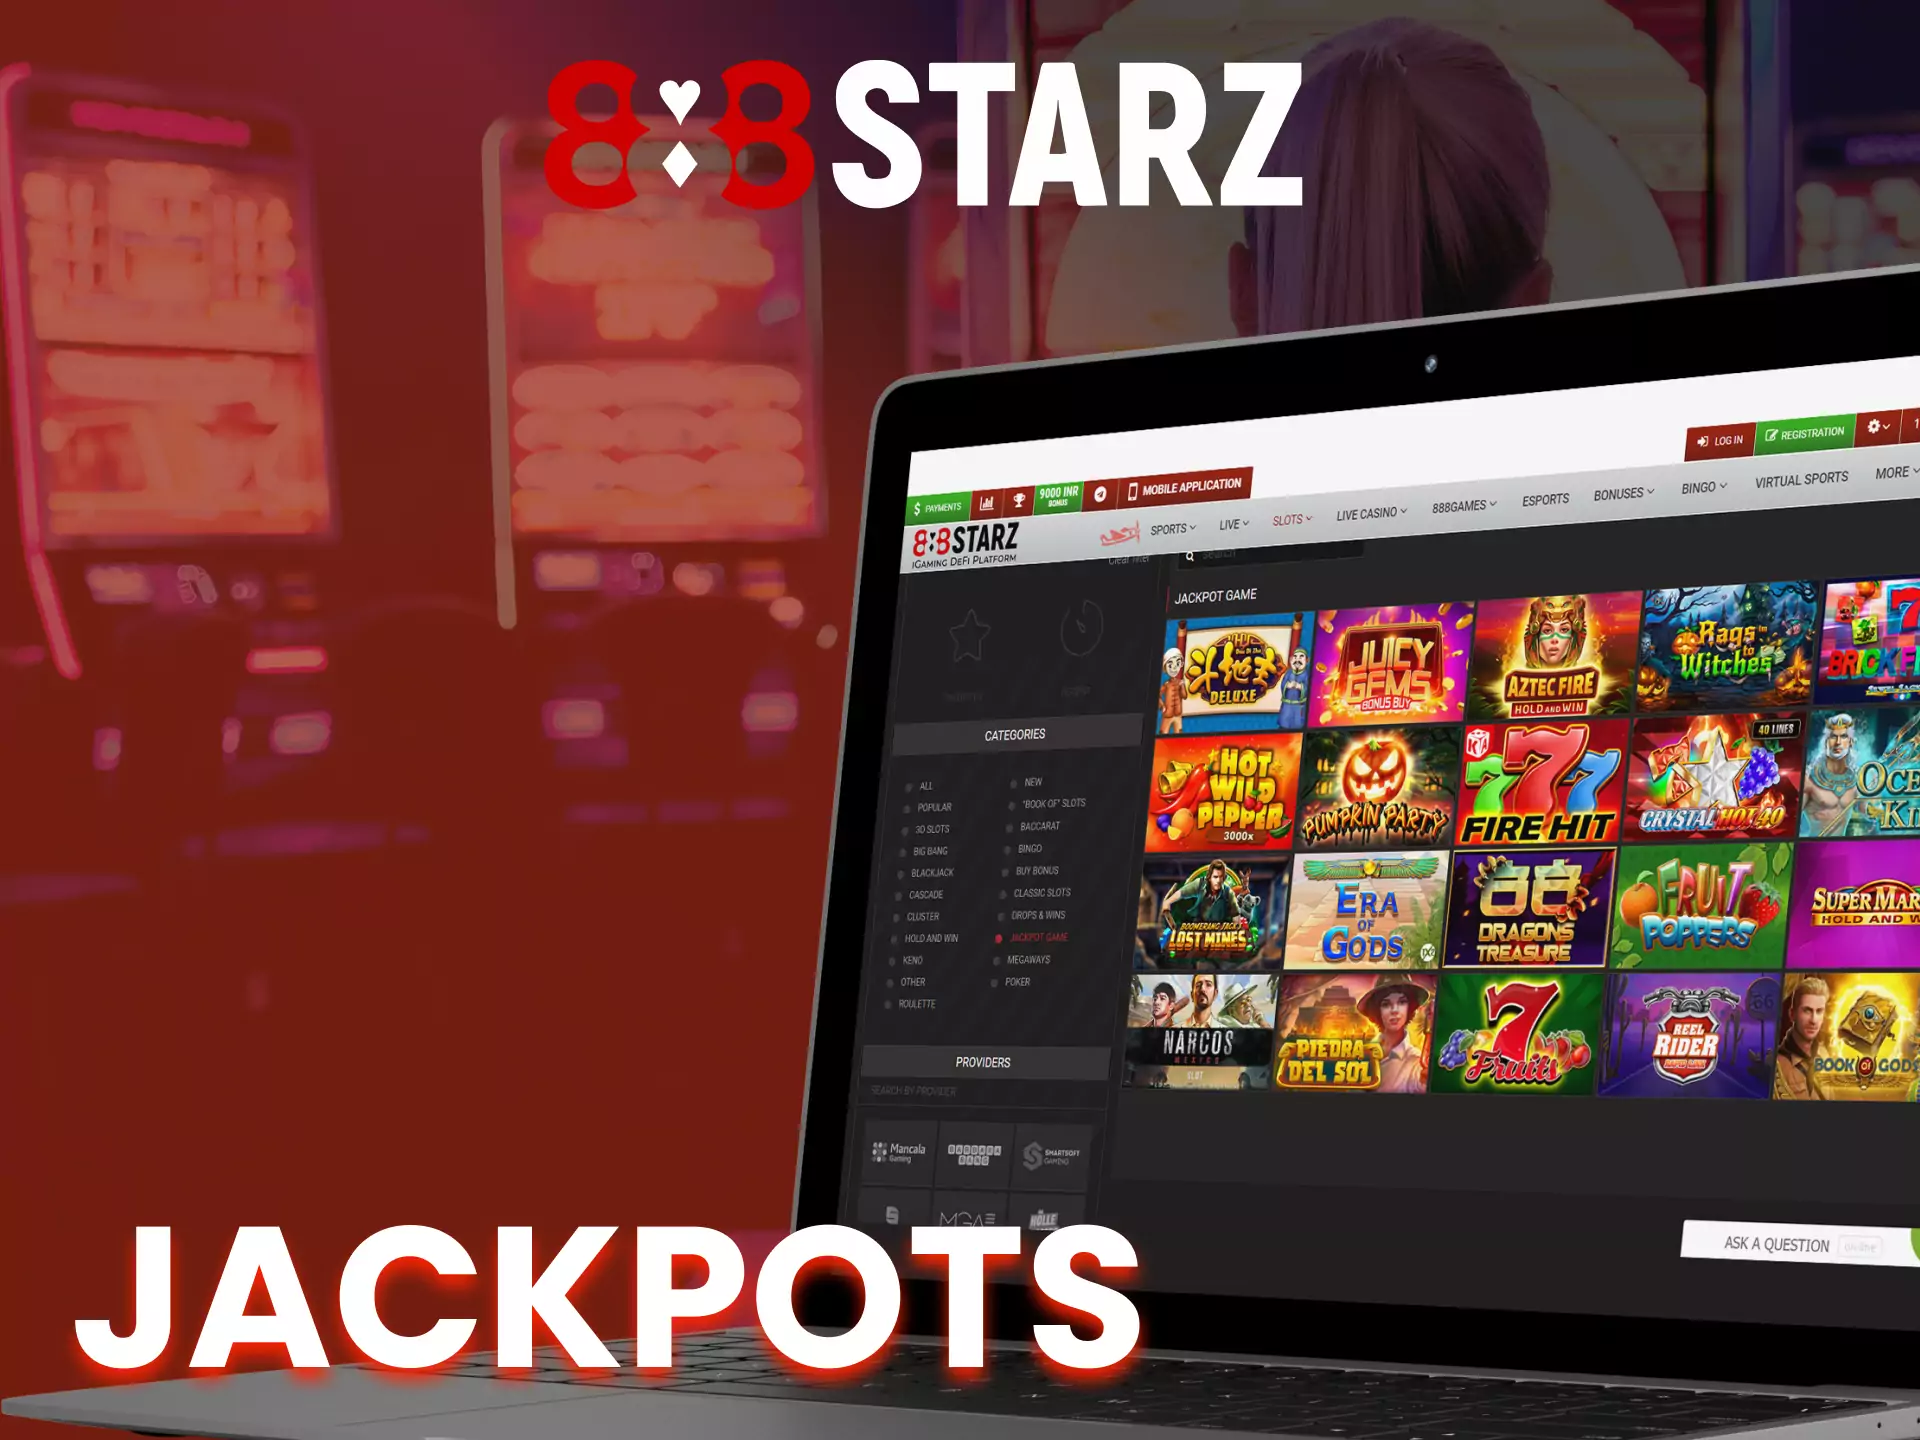 Win biggest amount of money by playing 888starz jackpot games.